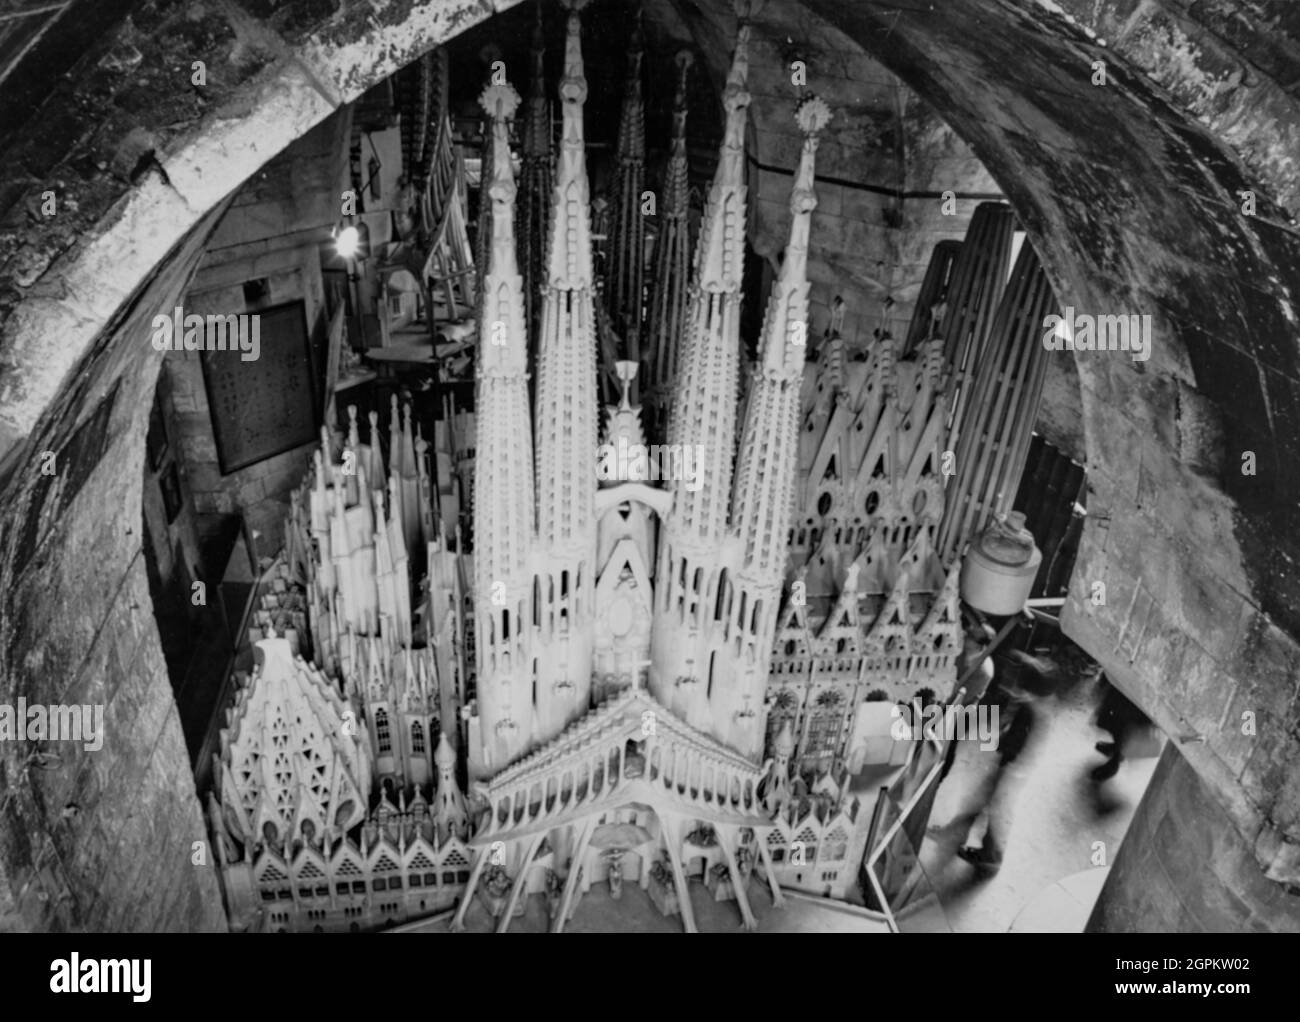 Sagrada Familia (museum in the crypt of the Passion Facade): the 1:25 scaled plaster model made by Gaudí for the Sagrada Familia from 1914 onwards (1926) destroyed during 1936-39 Spanish Civil War and restored after, 31-08-1979. Stock Photo